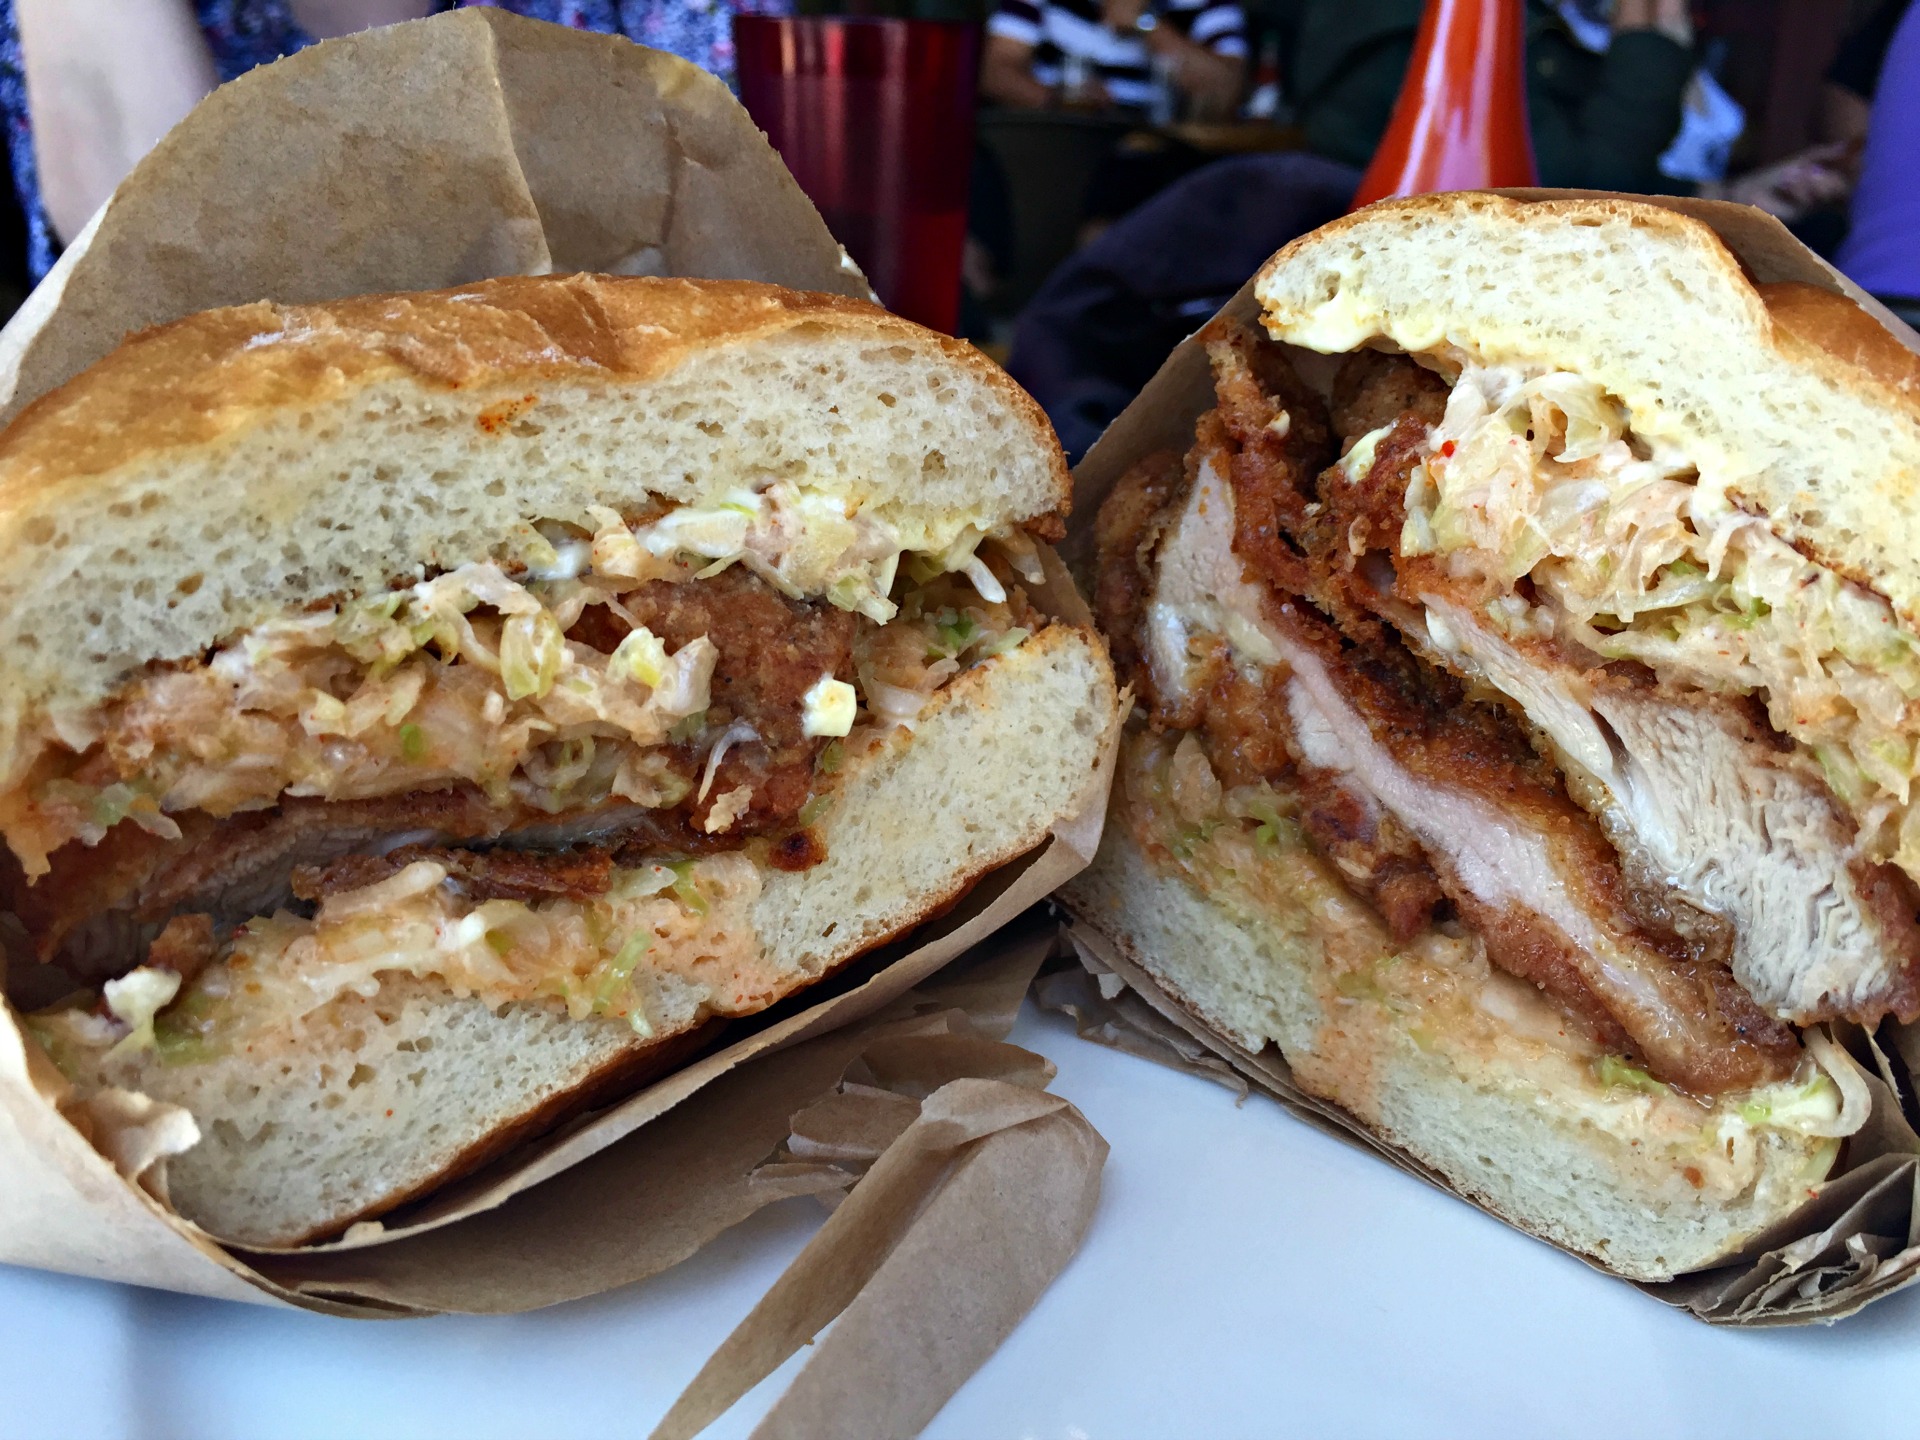 Naked Lunch's fried chicken sandwich with green garlic aioli.